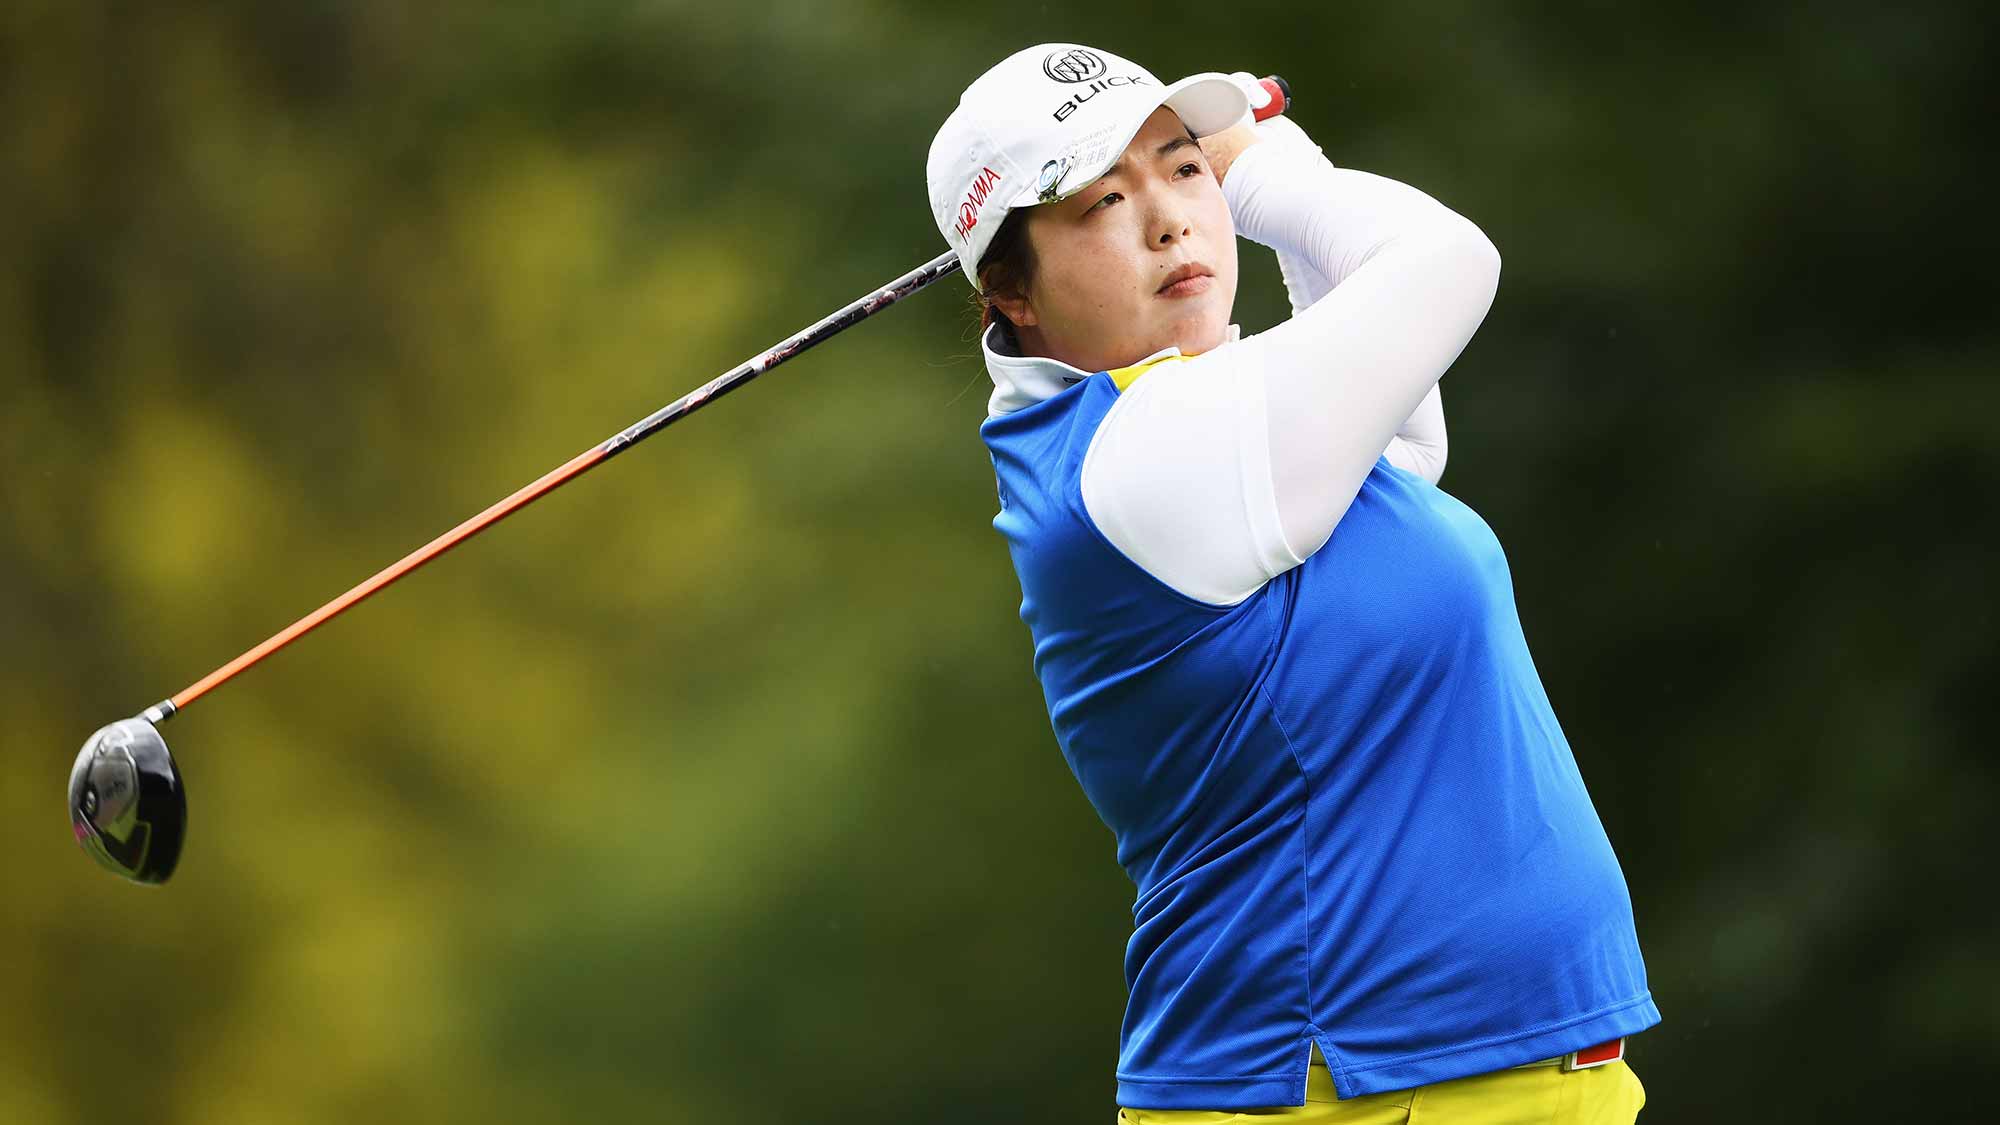 Shanshan Feng of China plays a shot during the first round of The Evian Championship